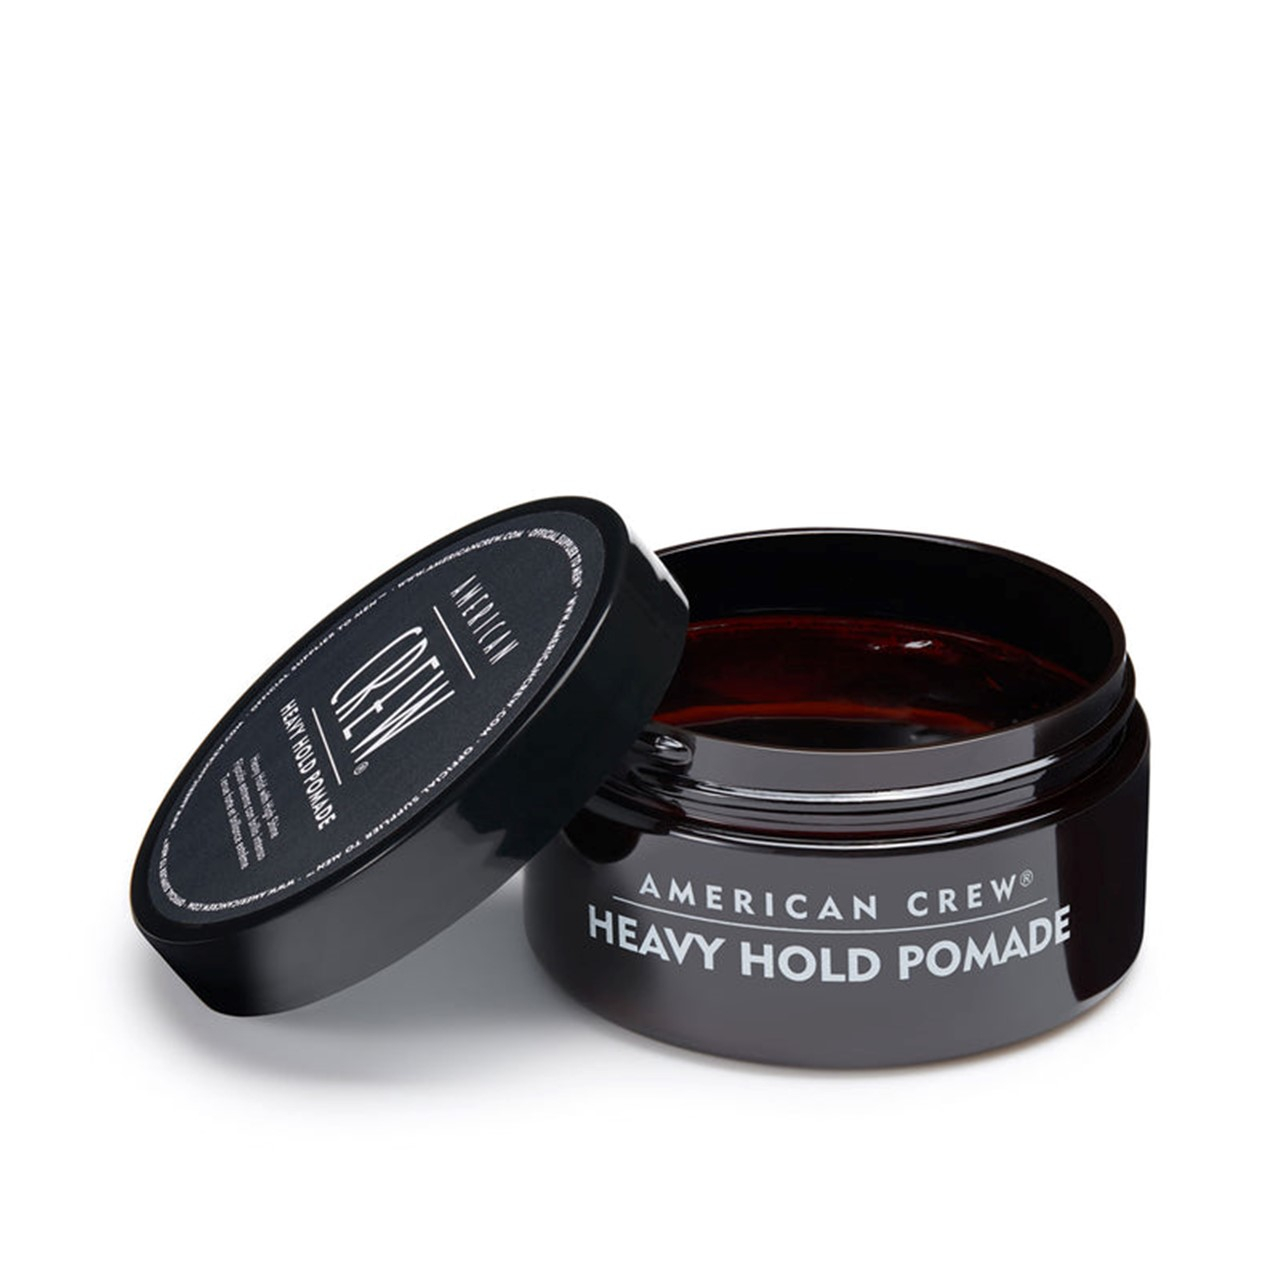 American Crew Heavy Hold Pomade 85g (3.00oz)